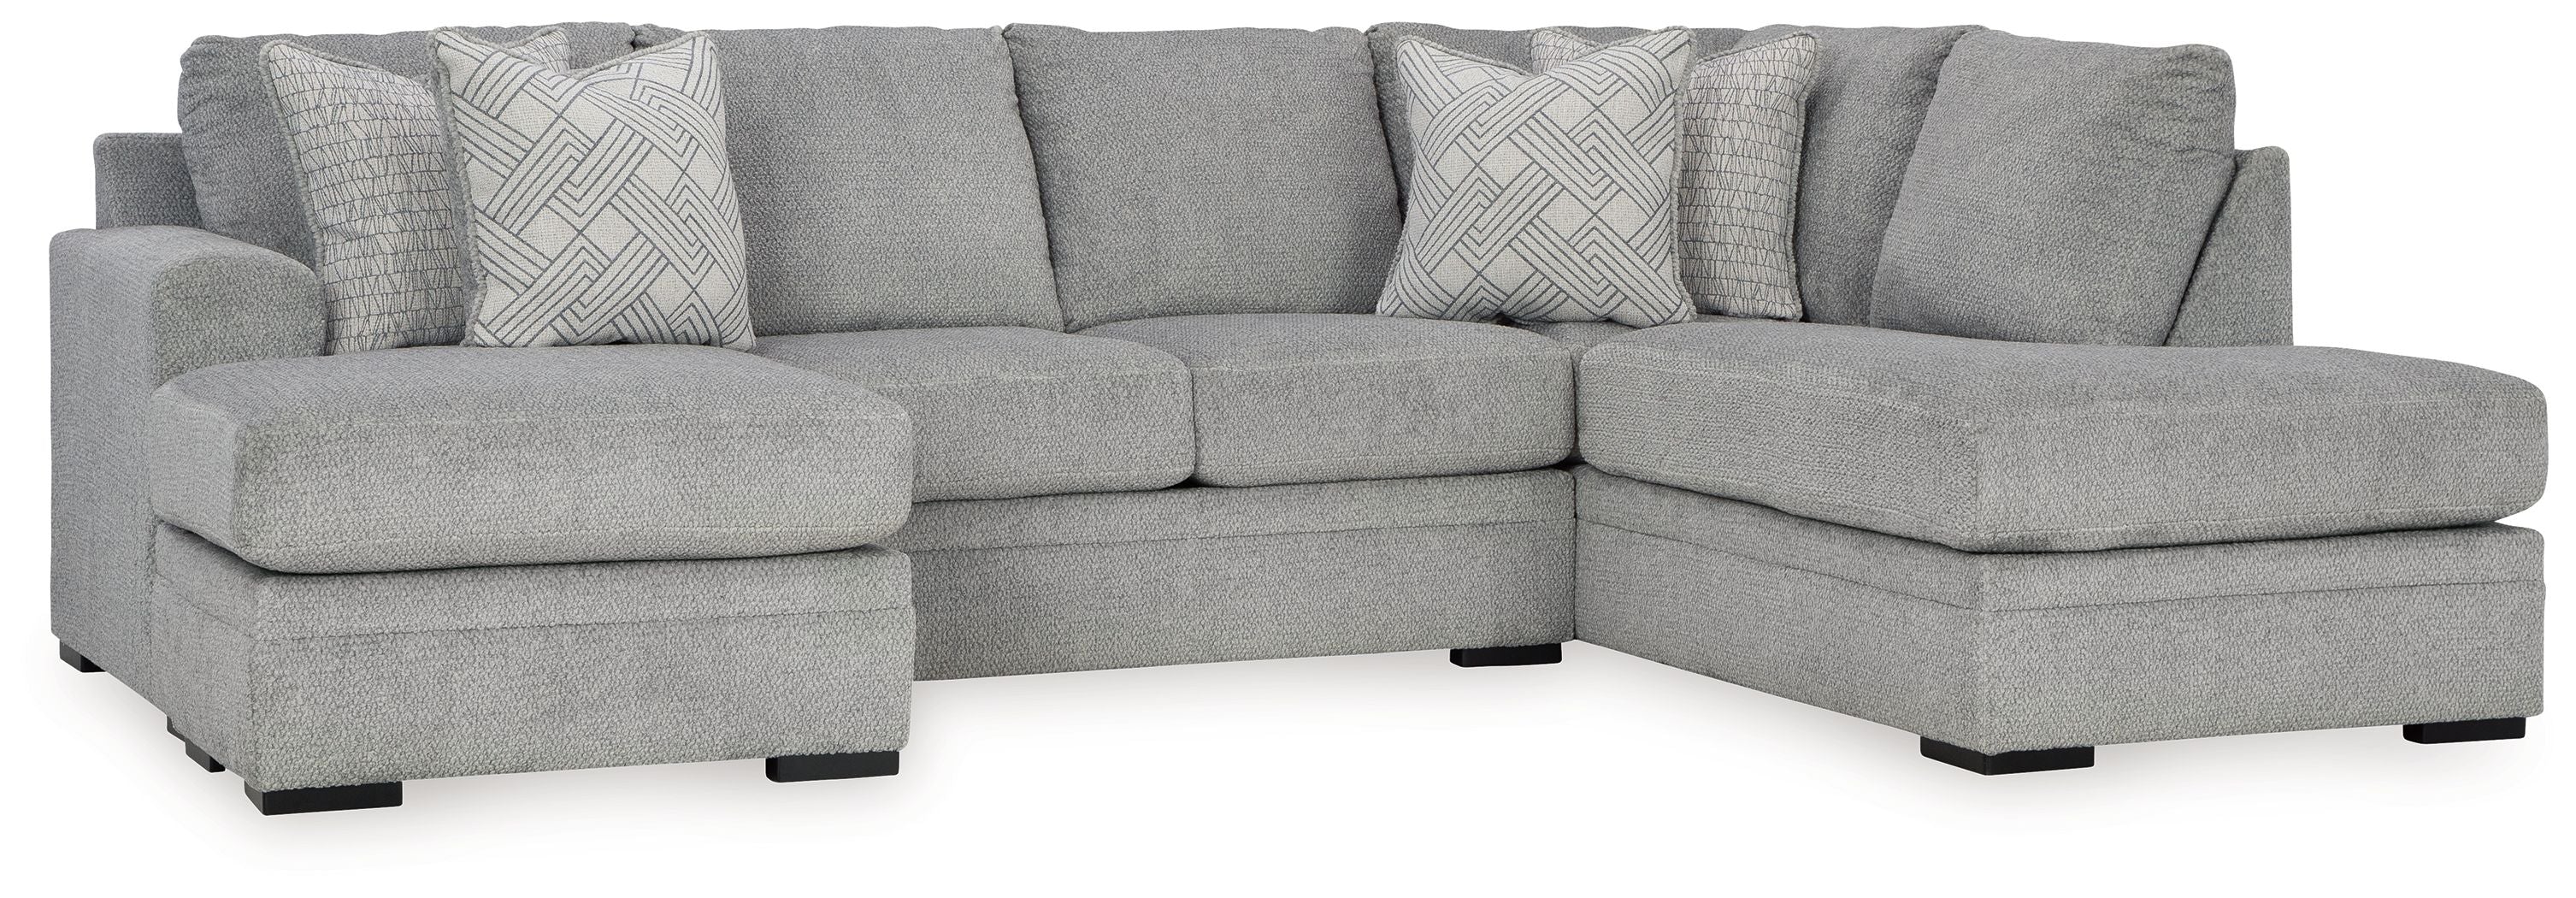 Ashley Casselbury Sectional w/ Chaise - Gray